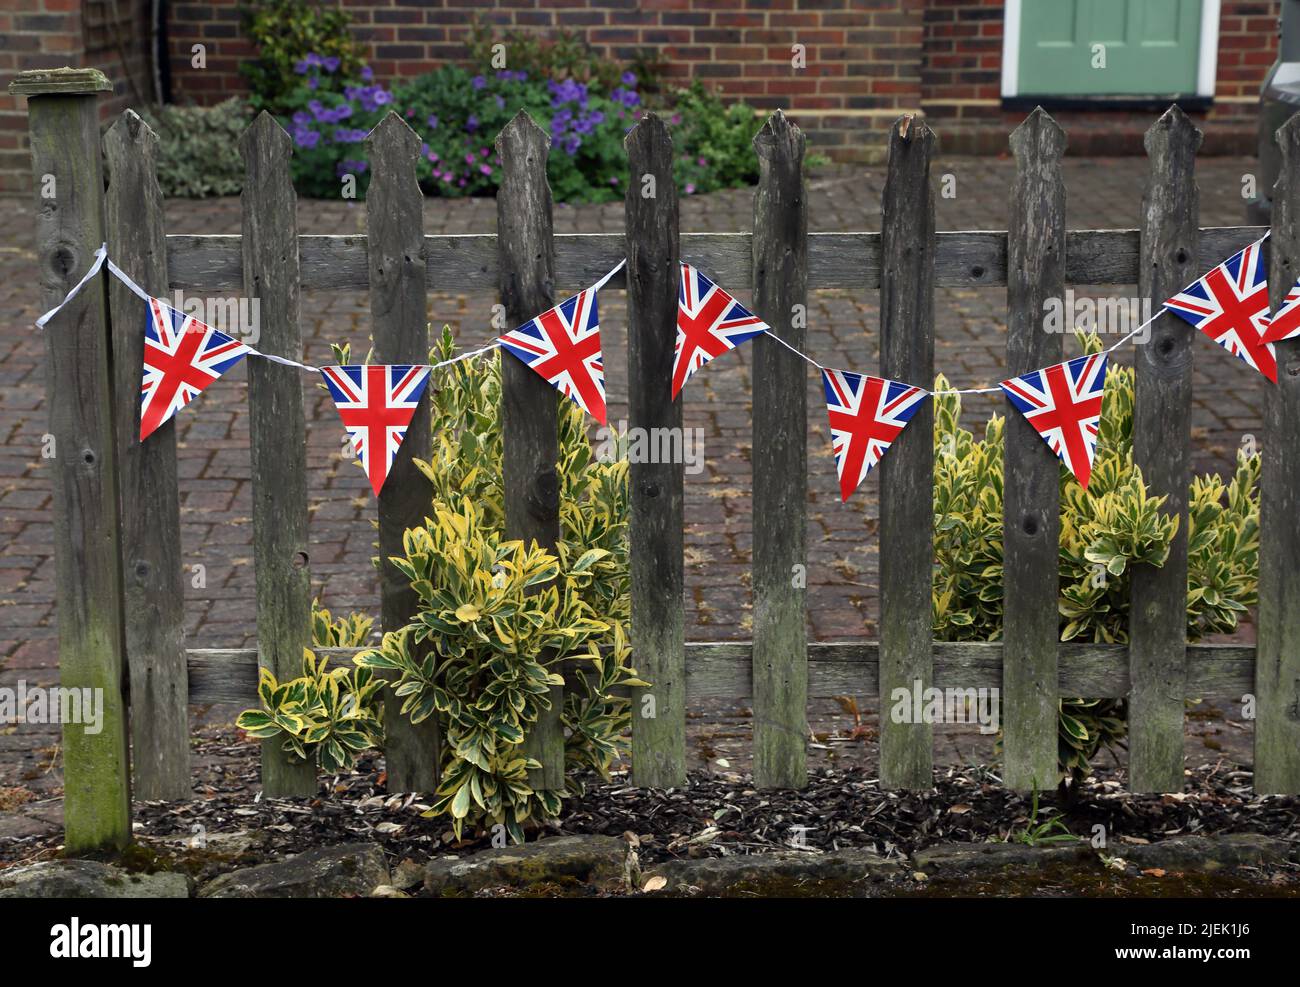 Union Jack Bunting on Fence outside house for Queen Elizabeth II Platinum Jubilee Surrey England Stock Photo